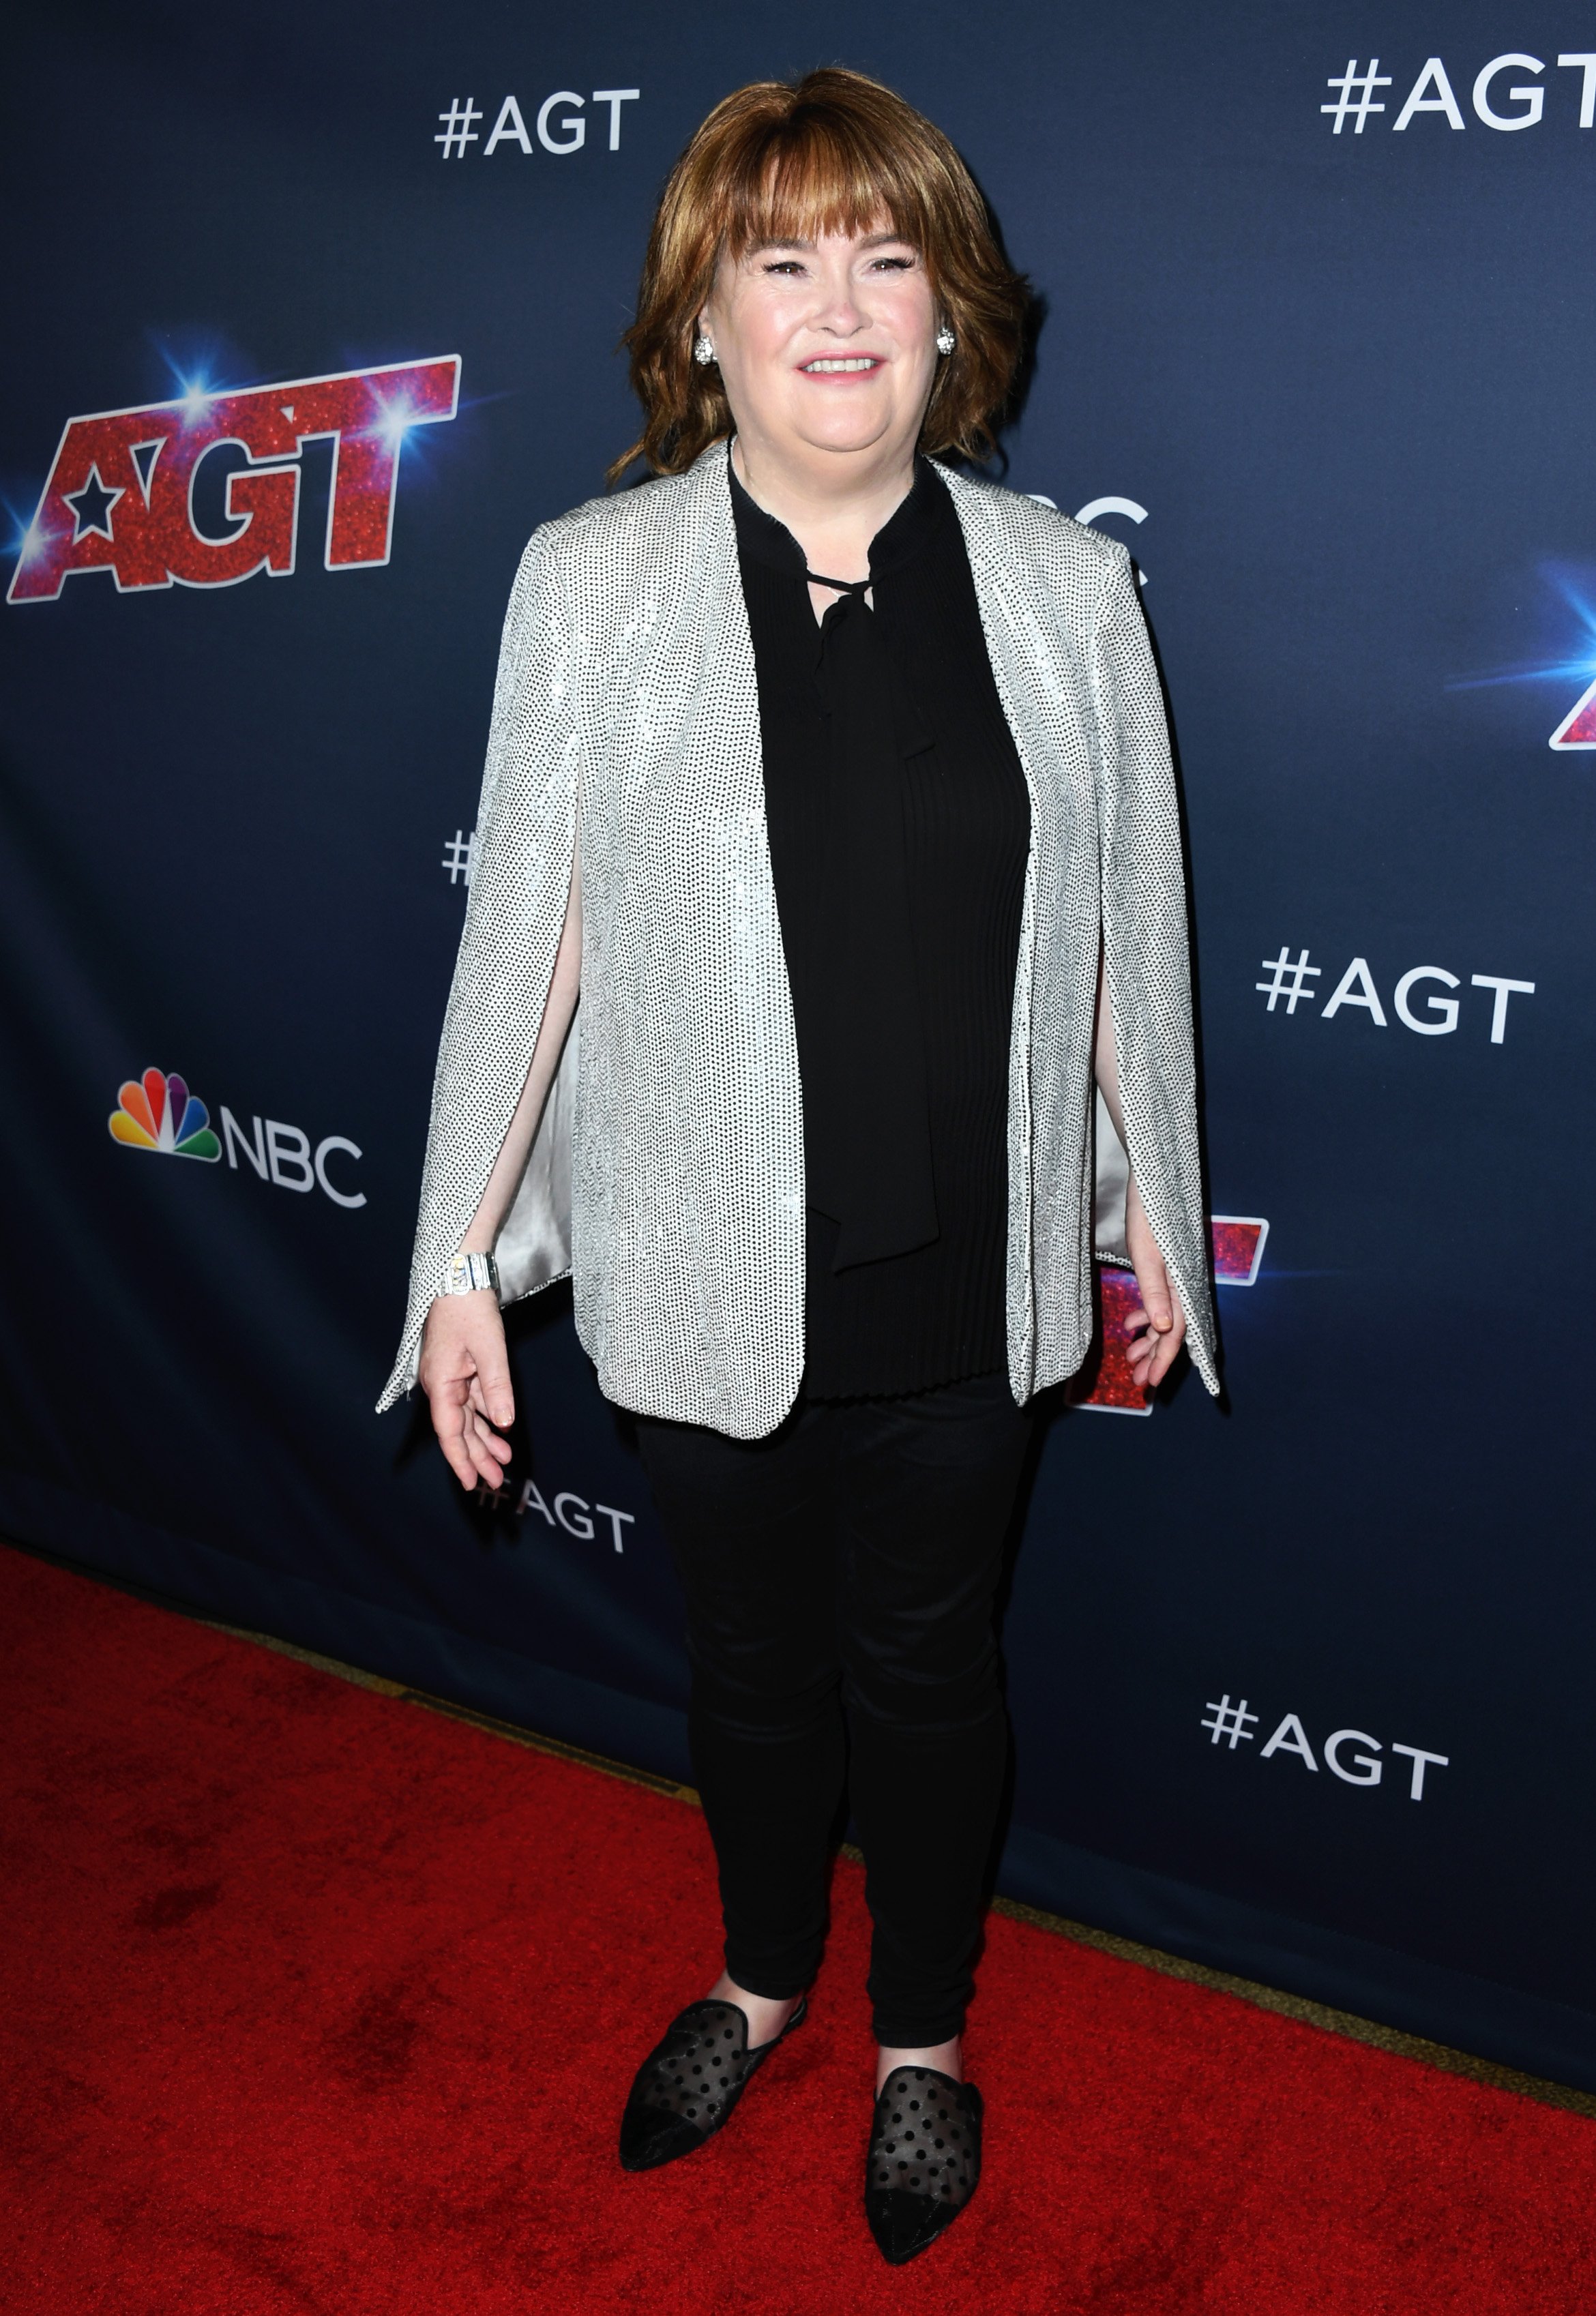 Susan Boyle at "America's Got Talent" Season 14 Live Show Red Carpet at Dolby Theatre on August 20, 2019 in Hollywood, California. | Source: Getty Images